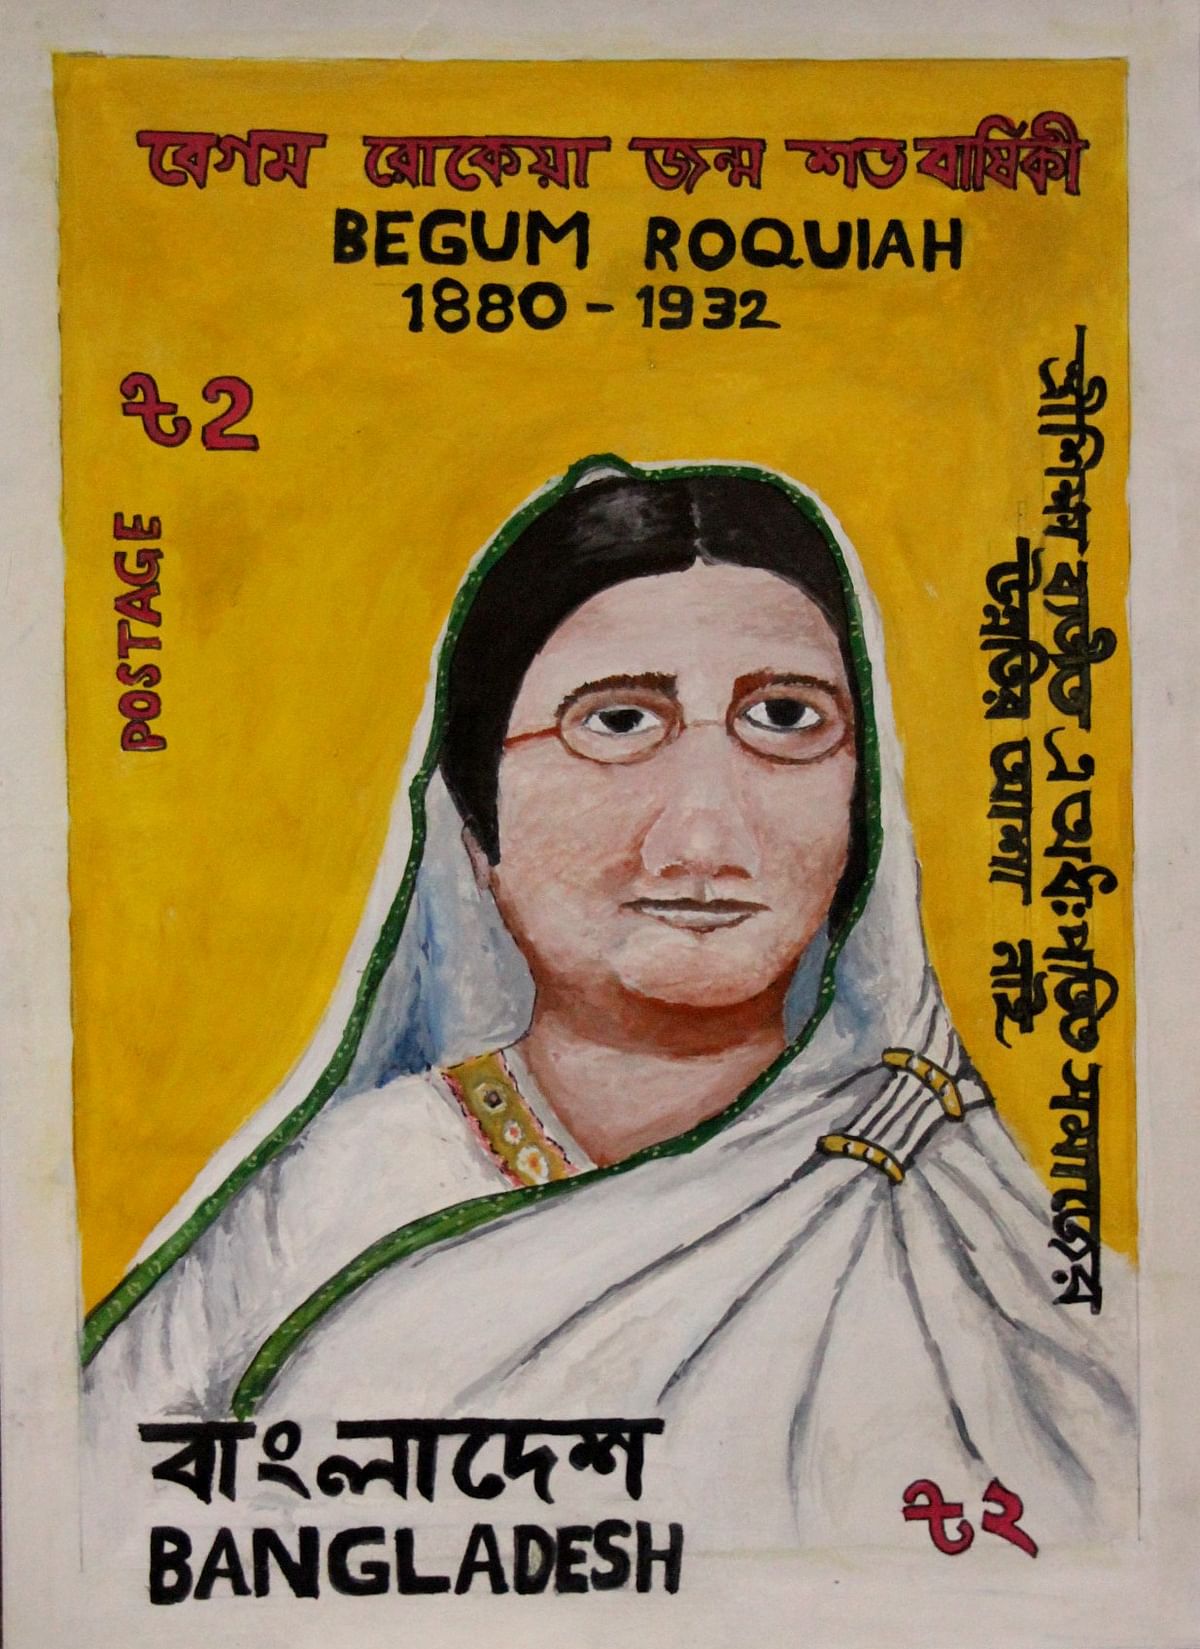 Women’s rights pioneer Begum Rokeya has been painted as per a stamp. Photo: Prothom Alo